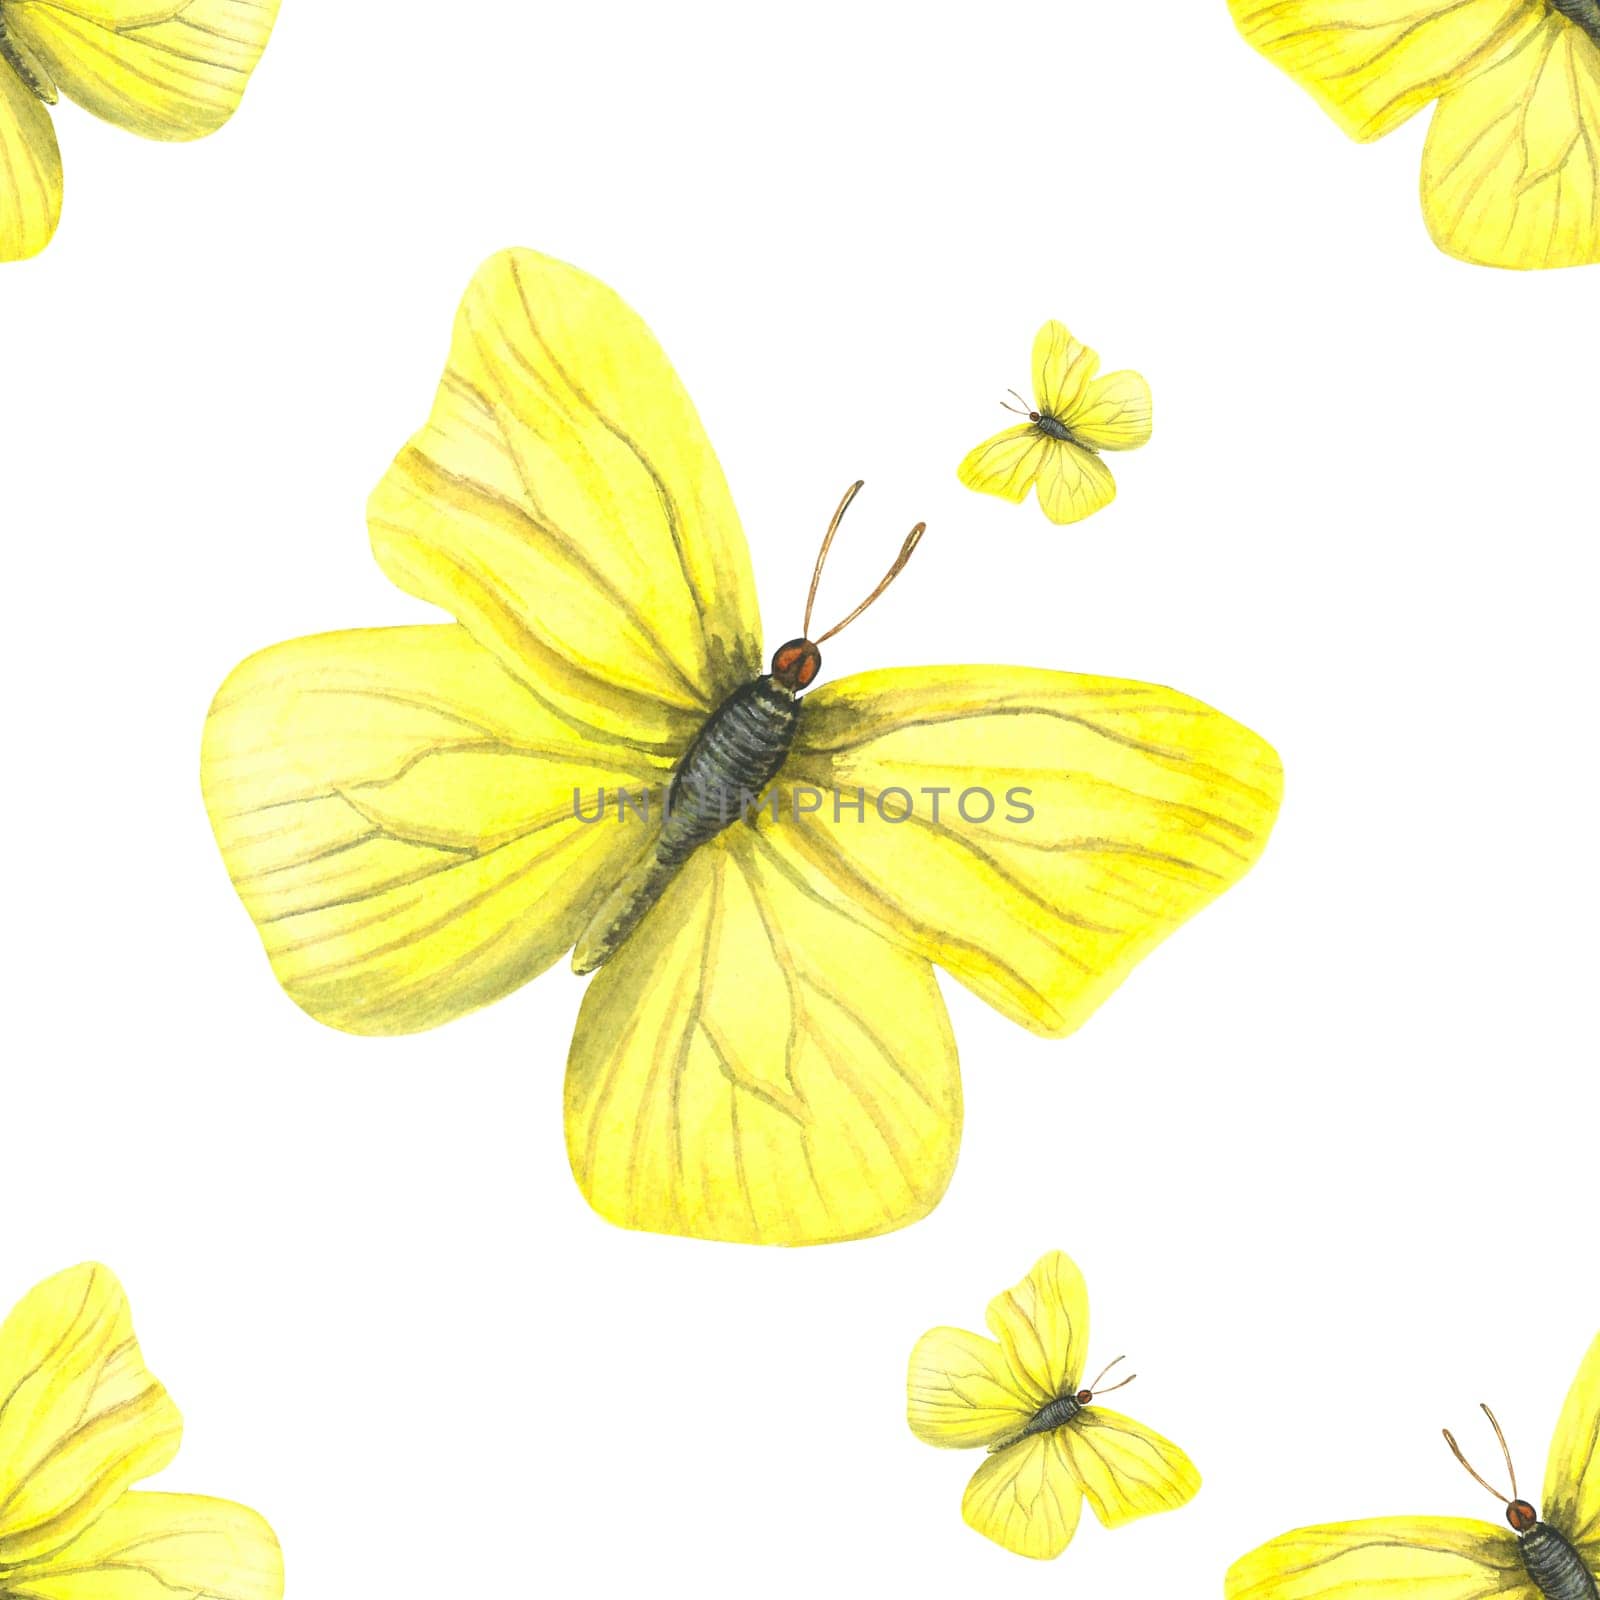 Seamless pattern of watercolor illustration of a male yellow butterfly Gonepteryx rhamni. Made by hand on a white background by OlSi